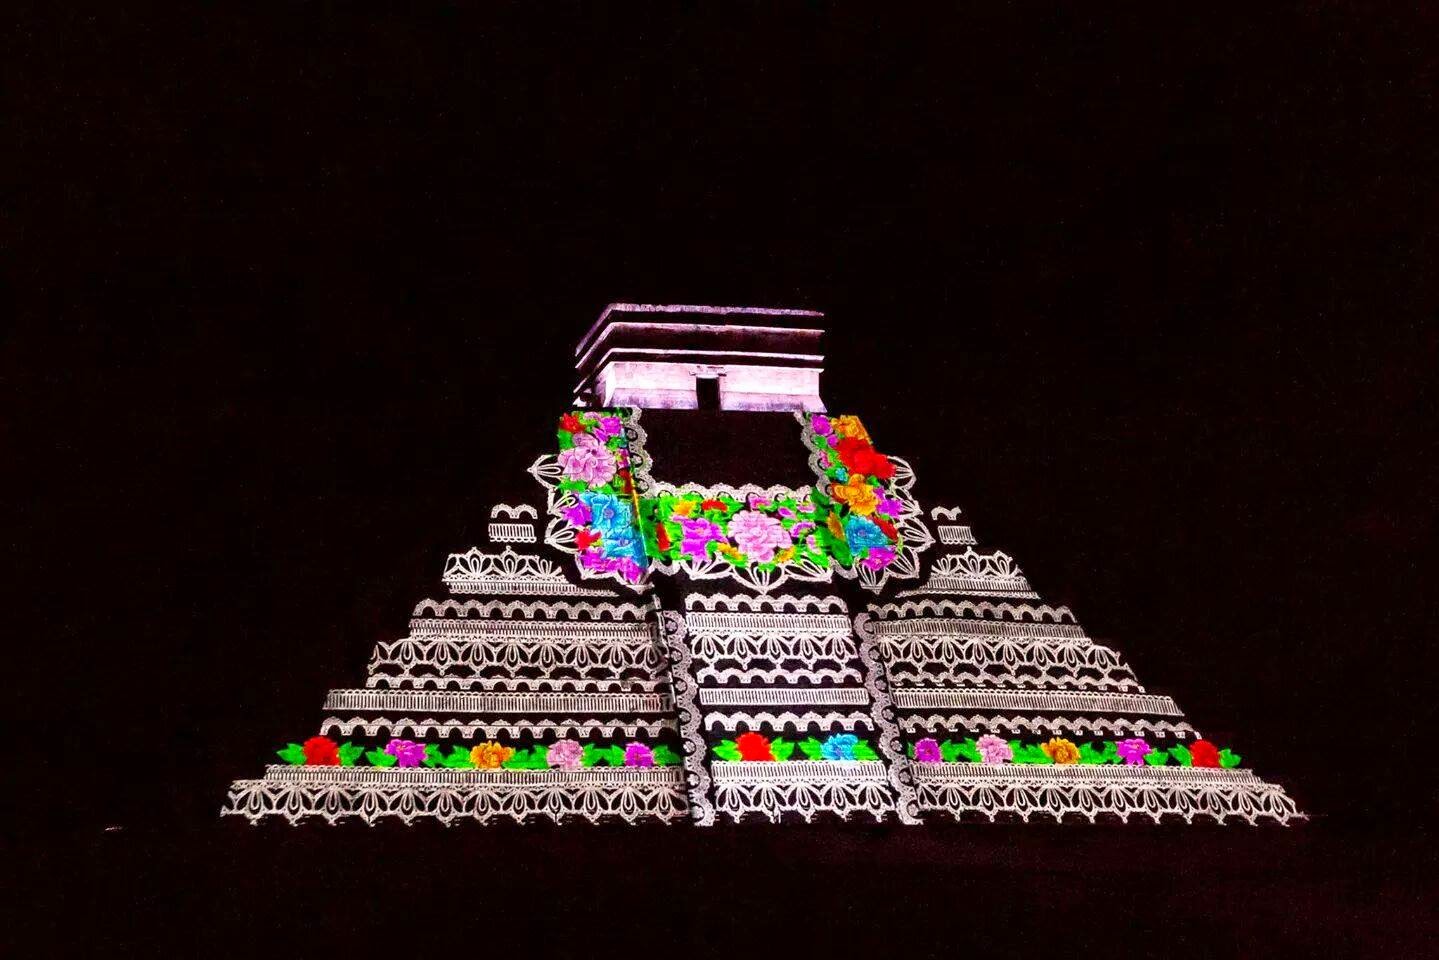 Spectacular light show in Chichen Itza | The Roving Traveller.